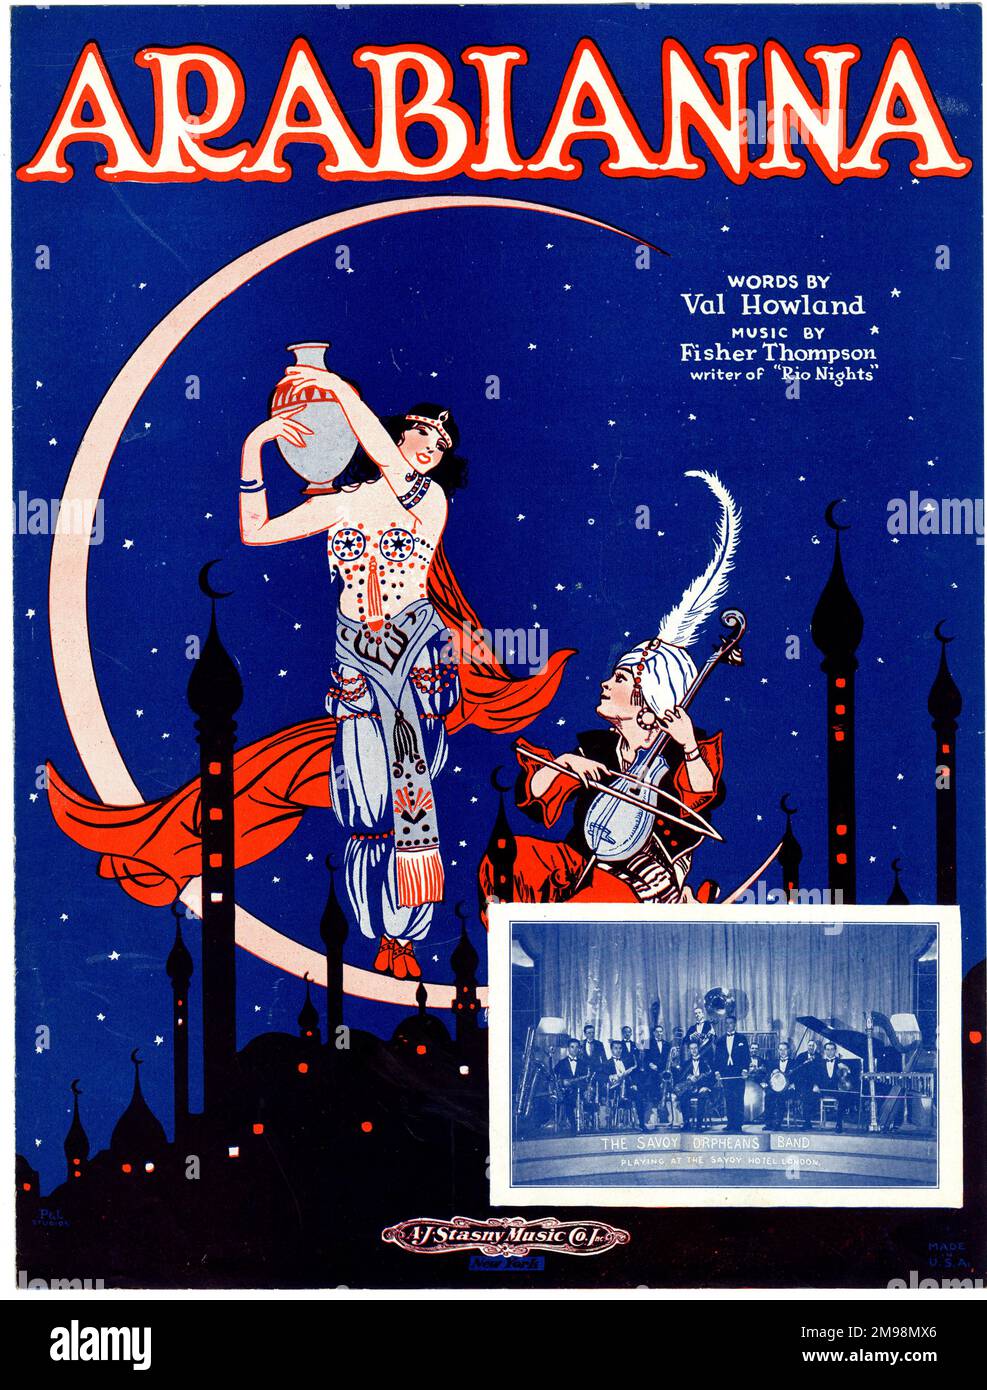 Music cover, Arabianna, words by Val Howland, music by Fisher Thompson, as performed by The Savoy Orpheans Band. Stock Photo